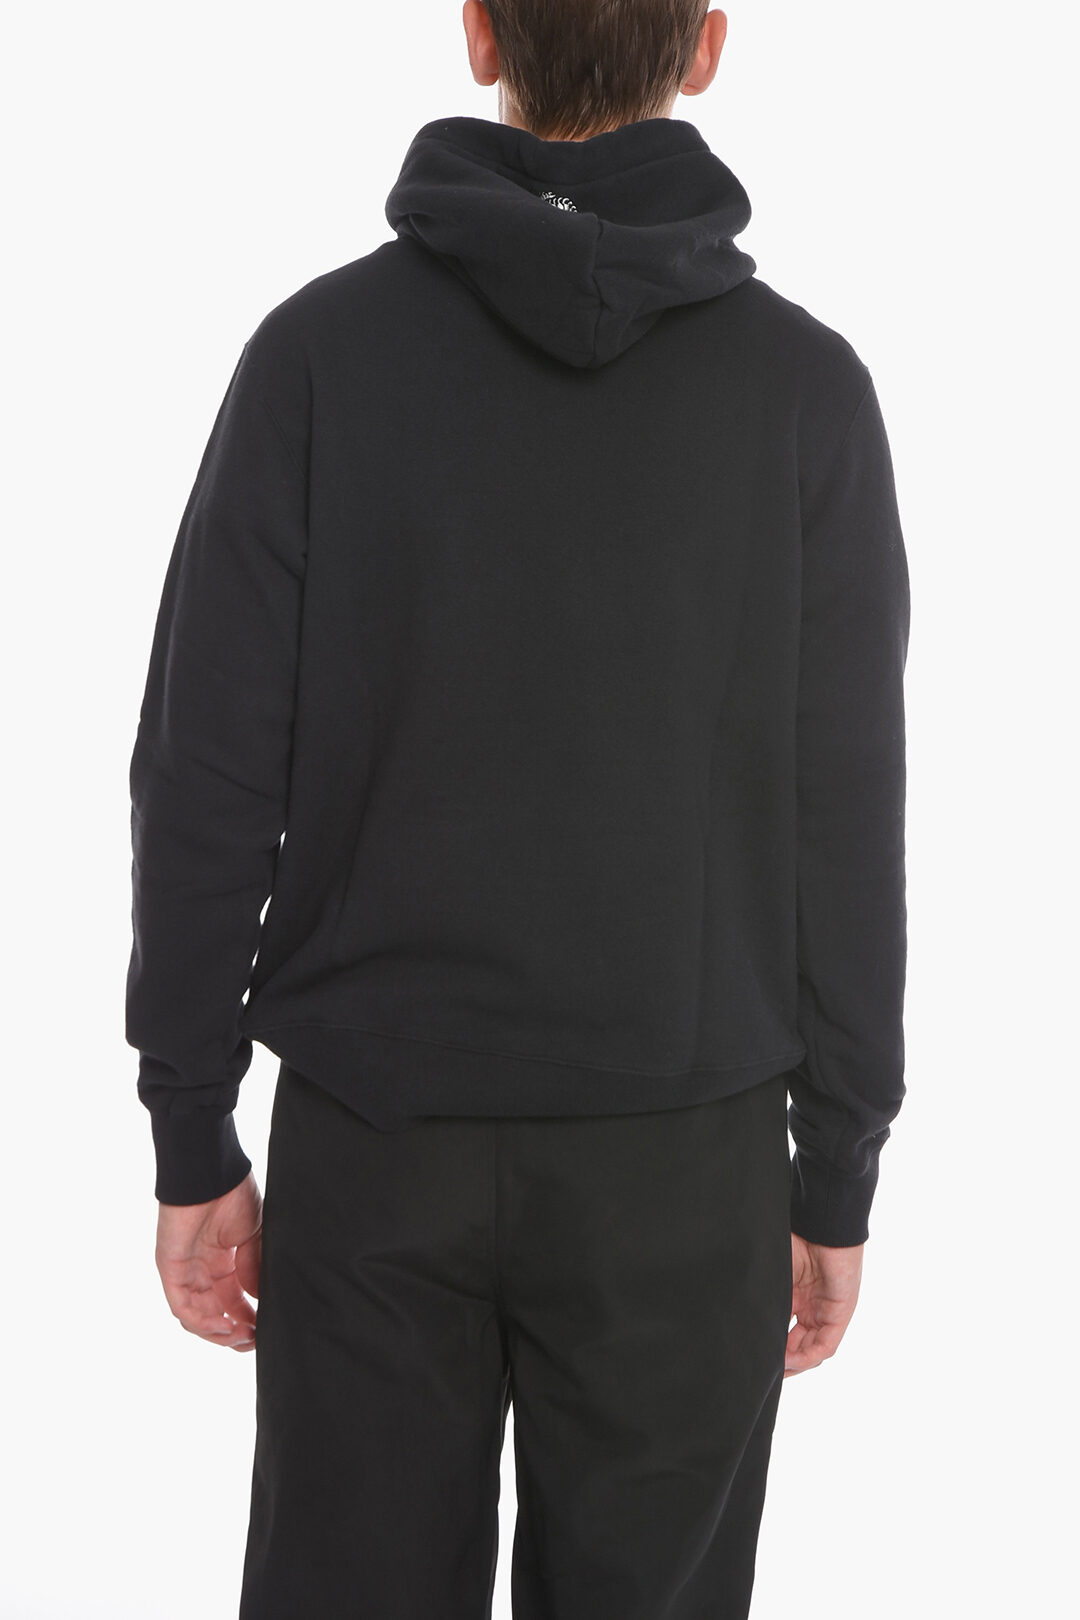 Undercover JUN TAKAHASHI Hoodie With Contrast Print men - Glamood Outlet